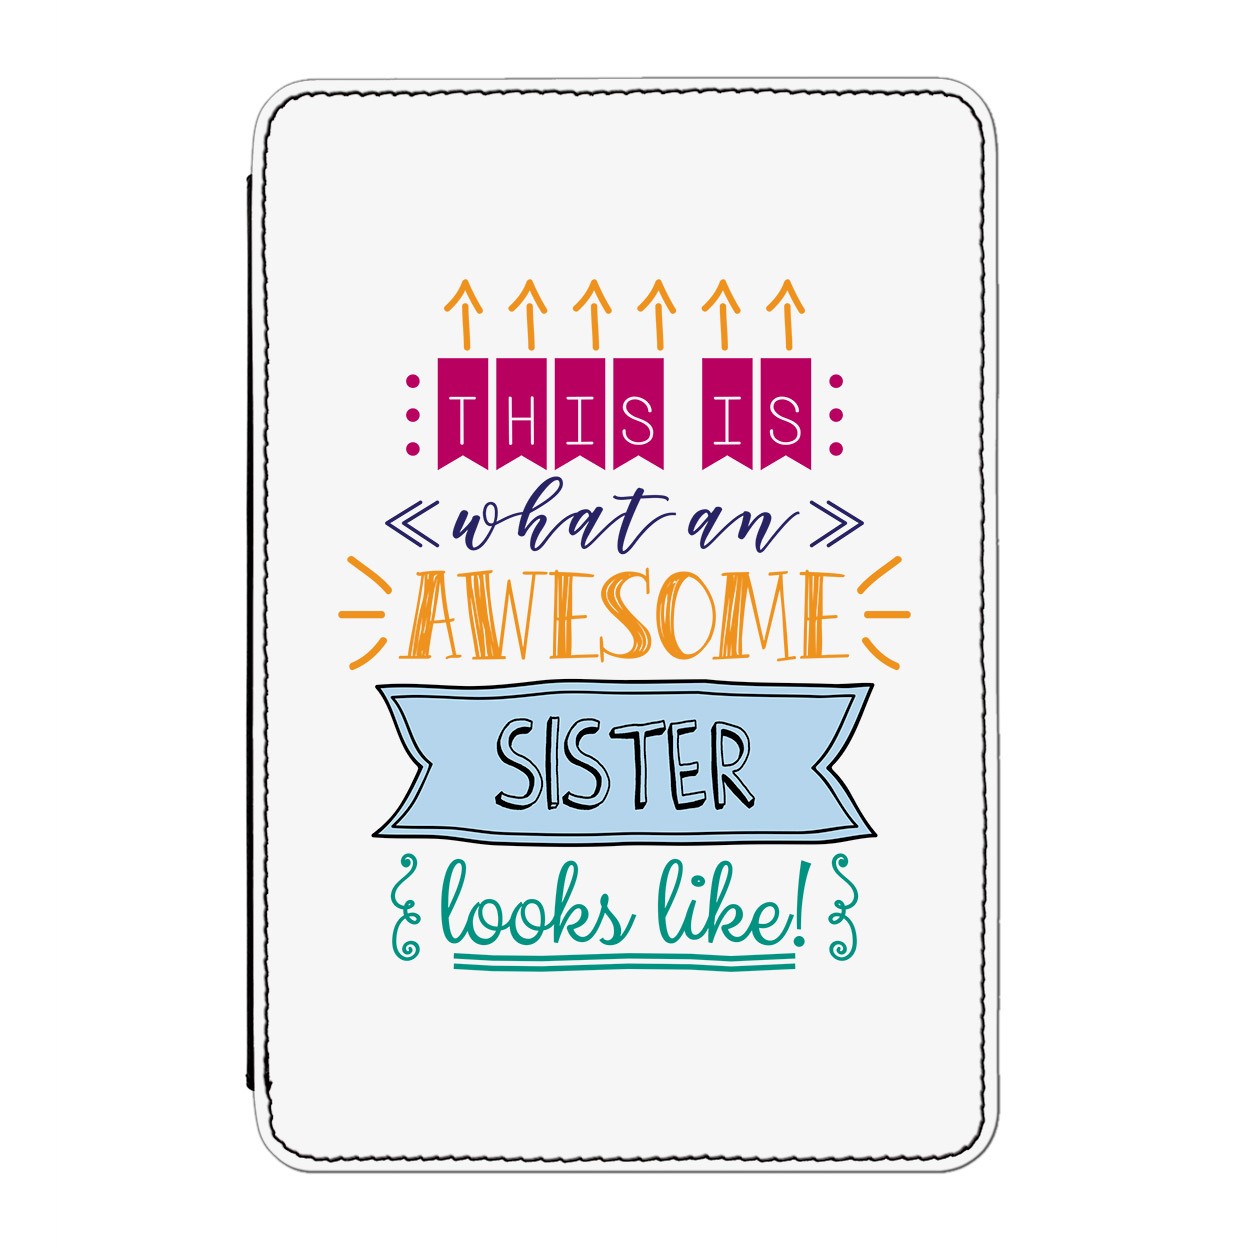 This Is What An Awesome Sister Looks Like Case Cover for Kindle 6" E-reader